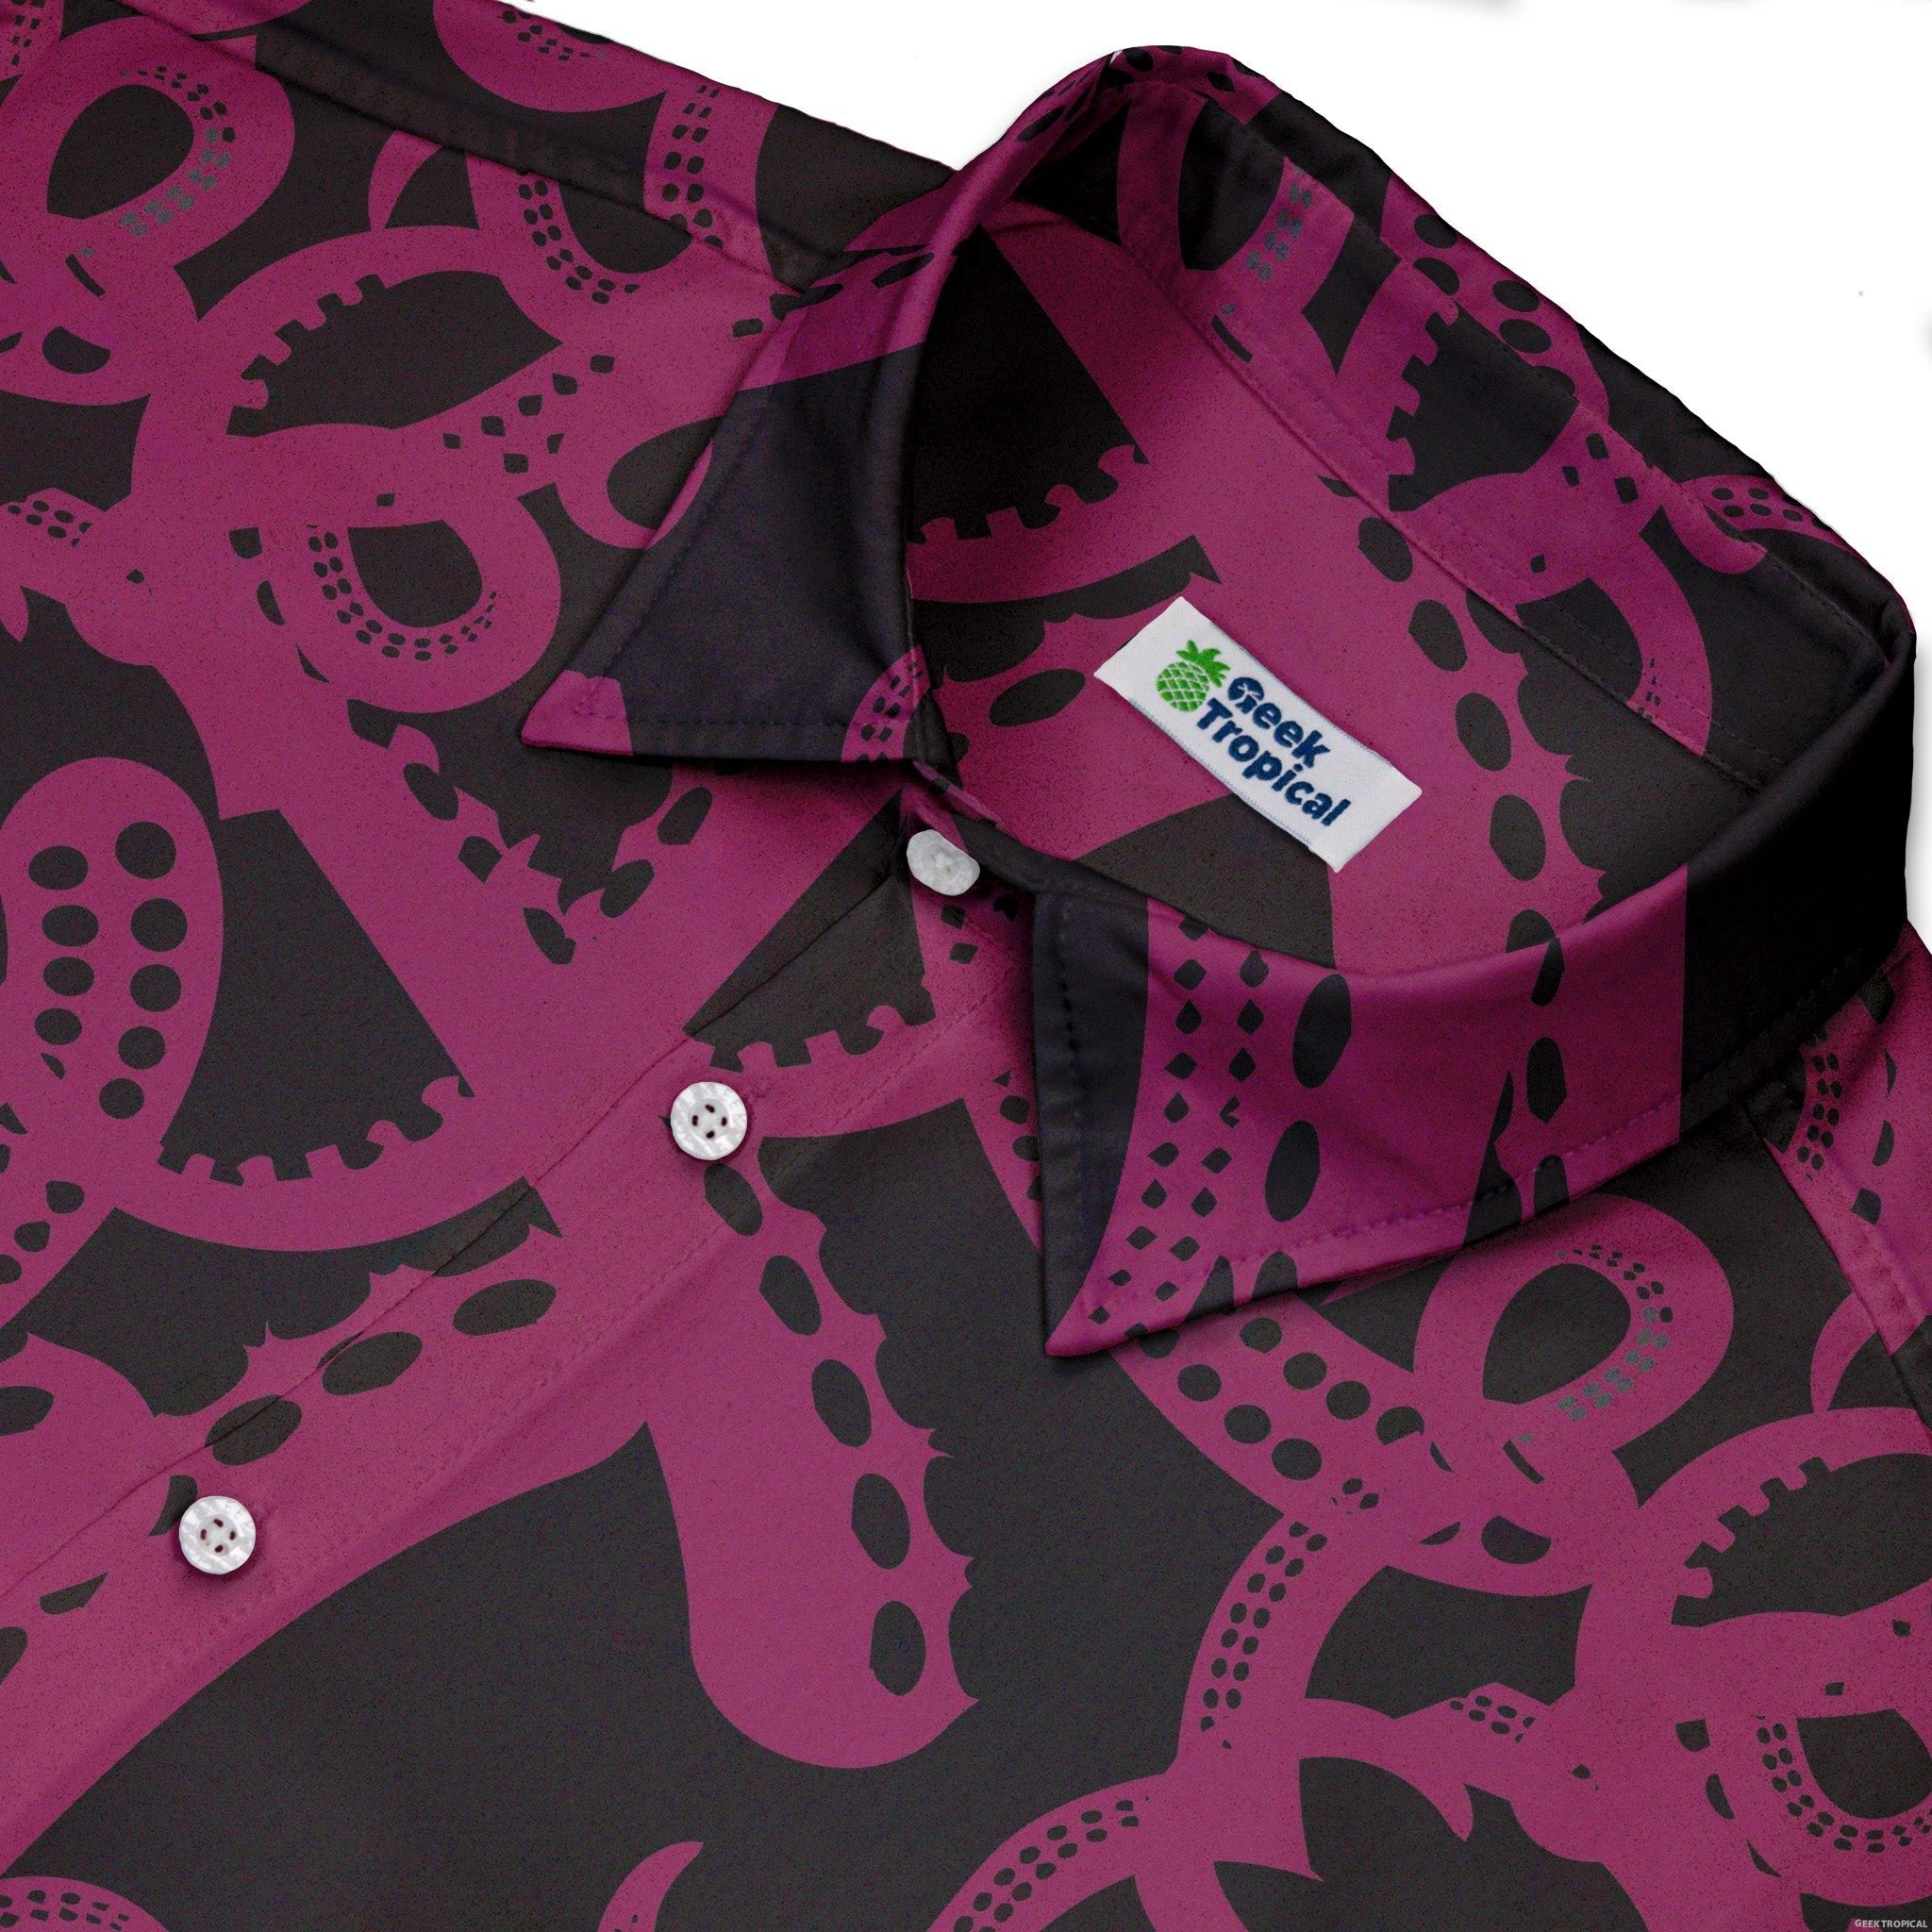 Tentacles of Cthulhu Button Up Shirt - adult sizing - Design by Heather Davenport - Fantasy Prints